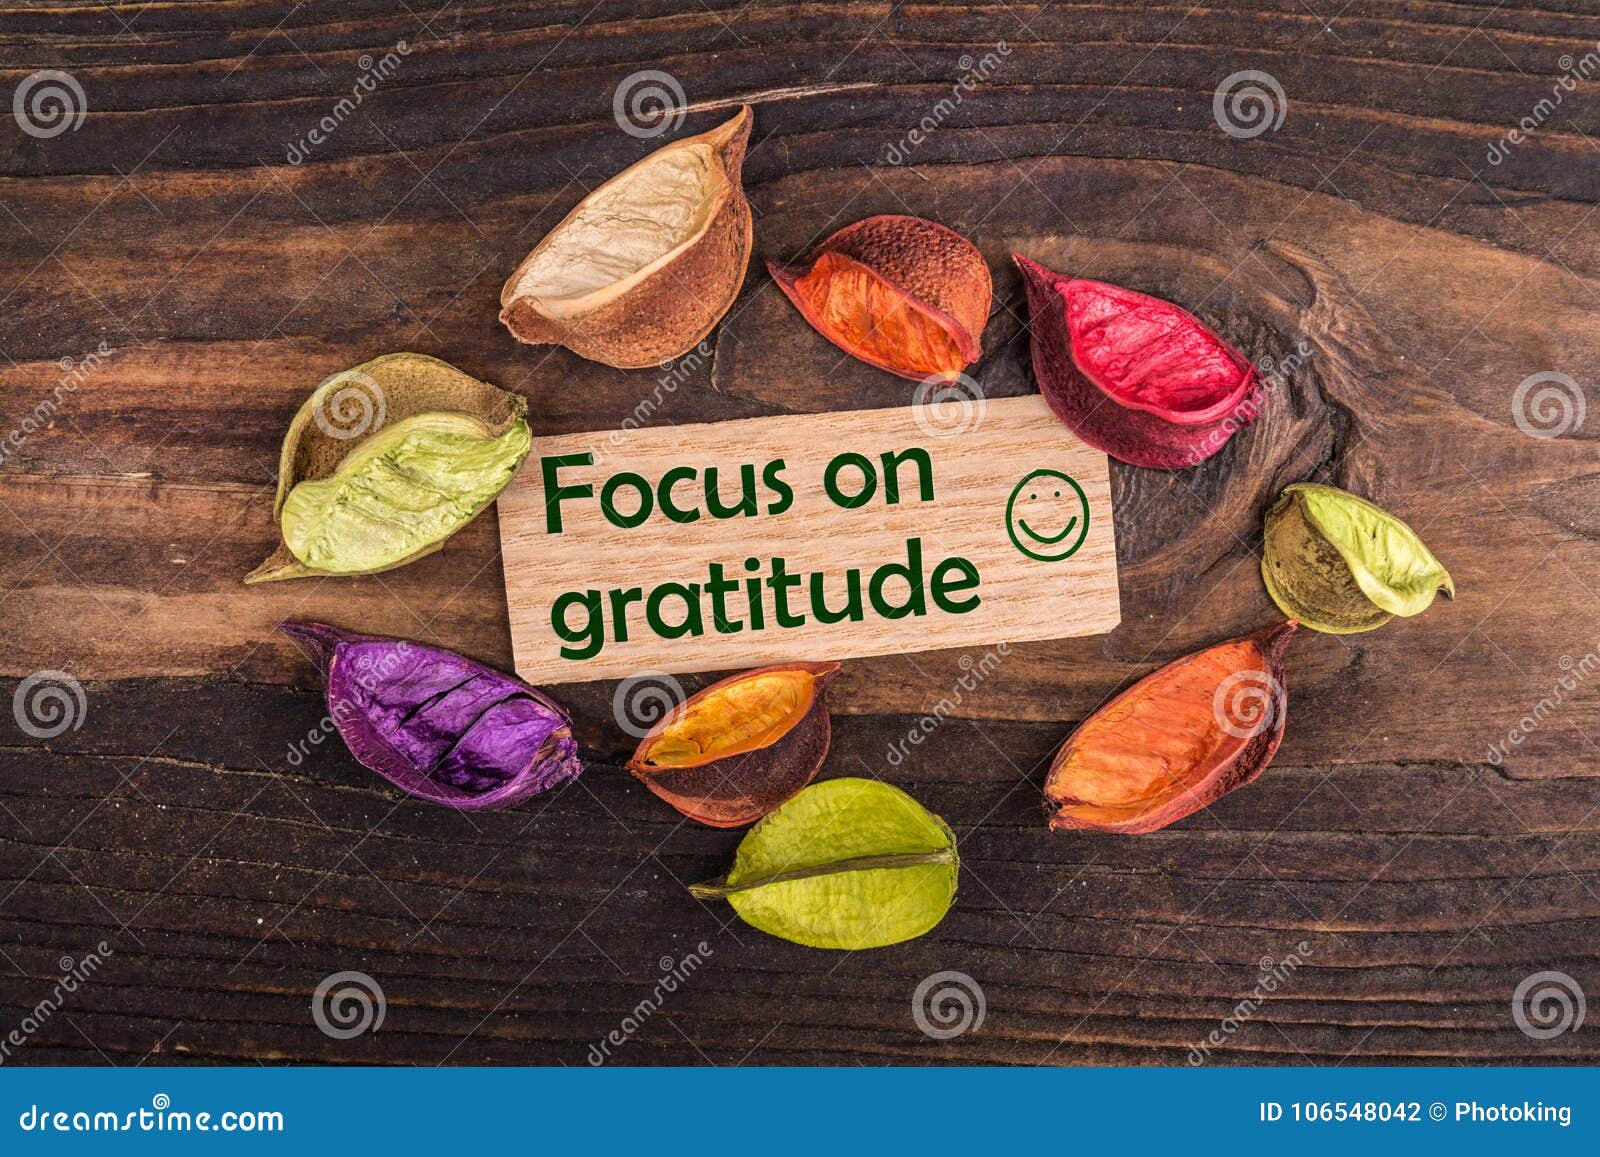 focus on gratitude with happy face